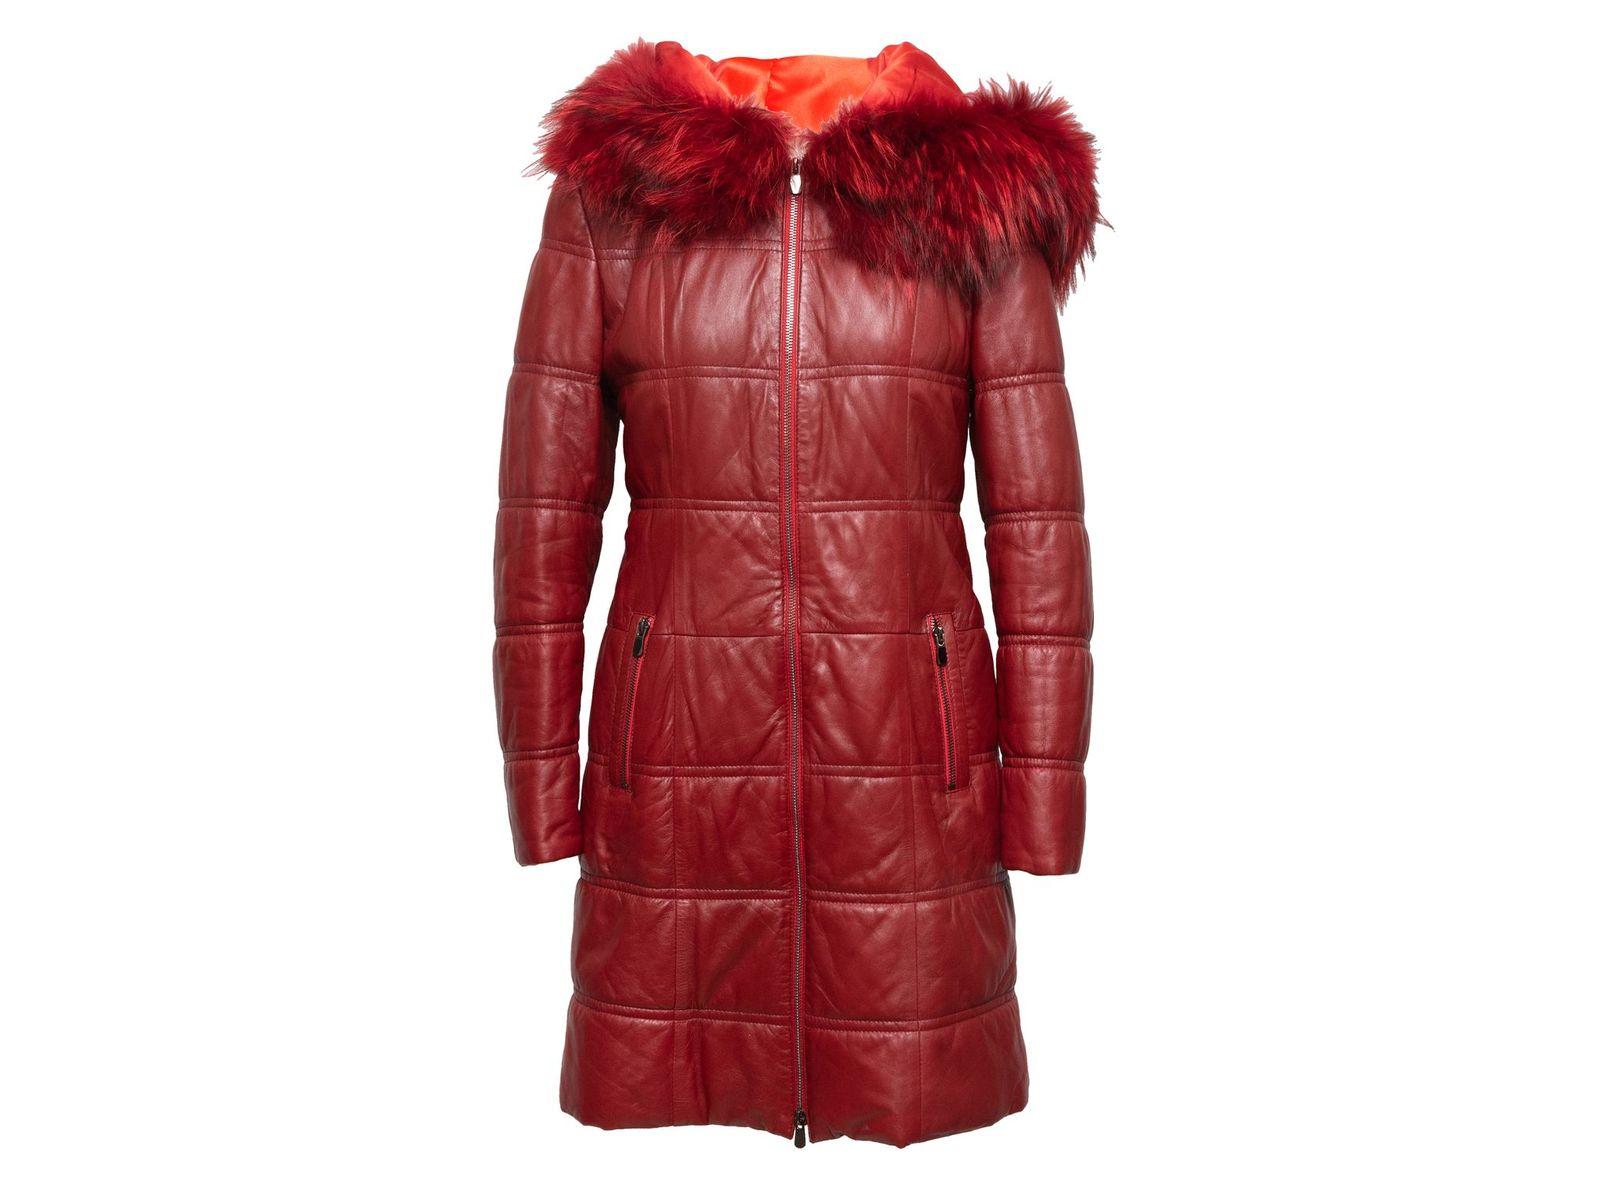 Camerino Red Quilted Leather & Fur-Trimmed Coat 1